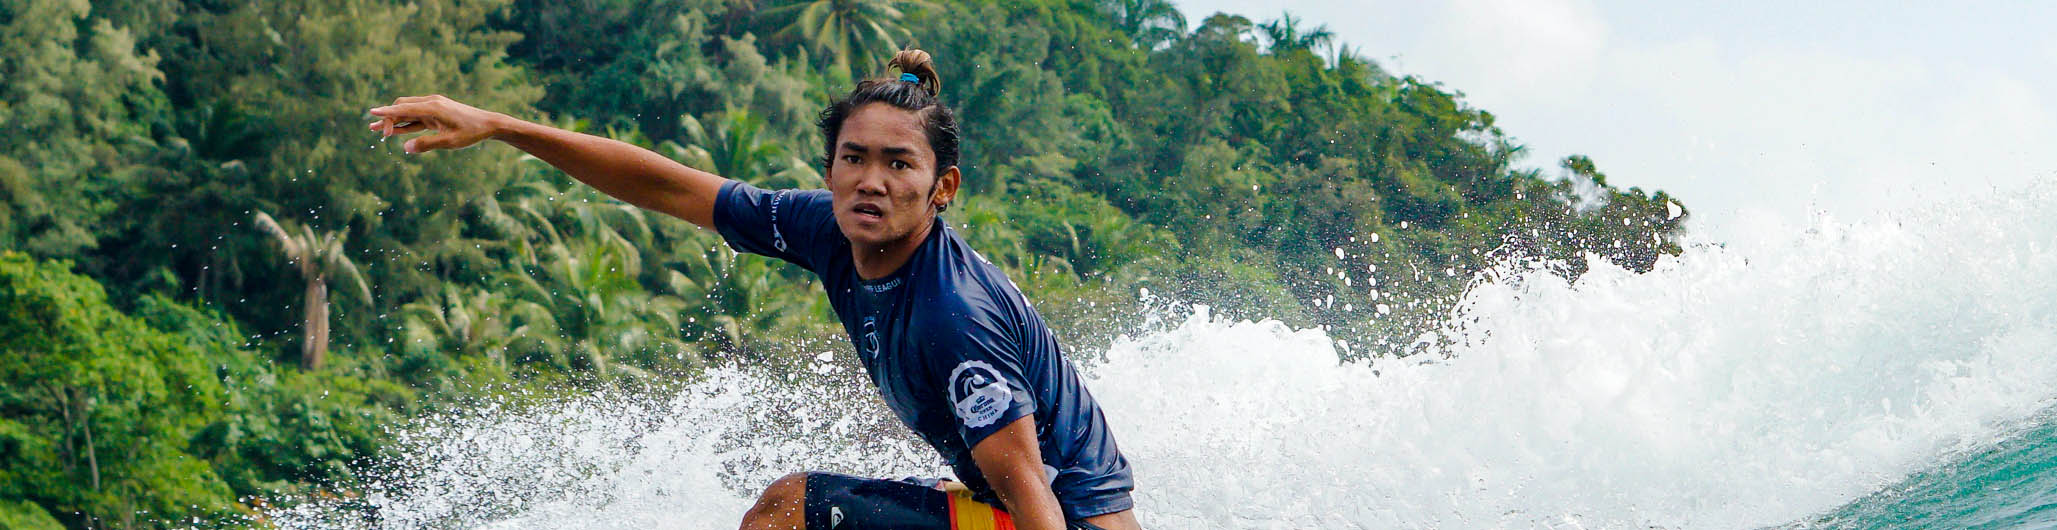 Indonesia Olympic Commitee - Surfing Still on the Hunt for Olympic Slot